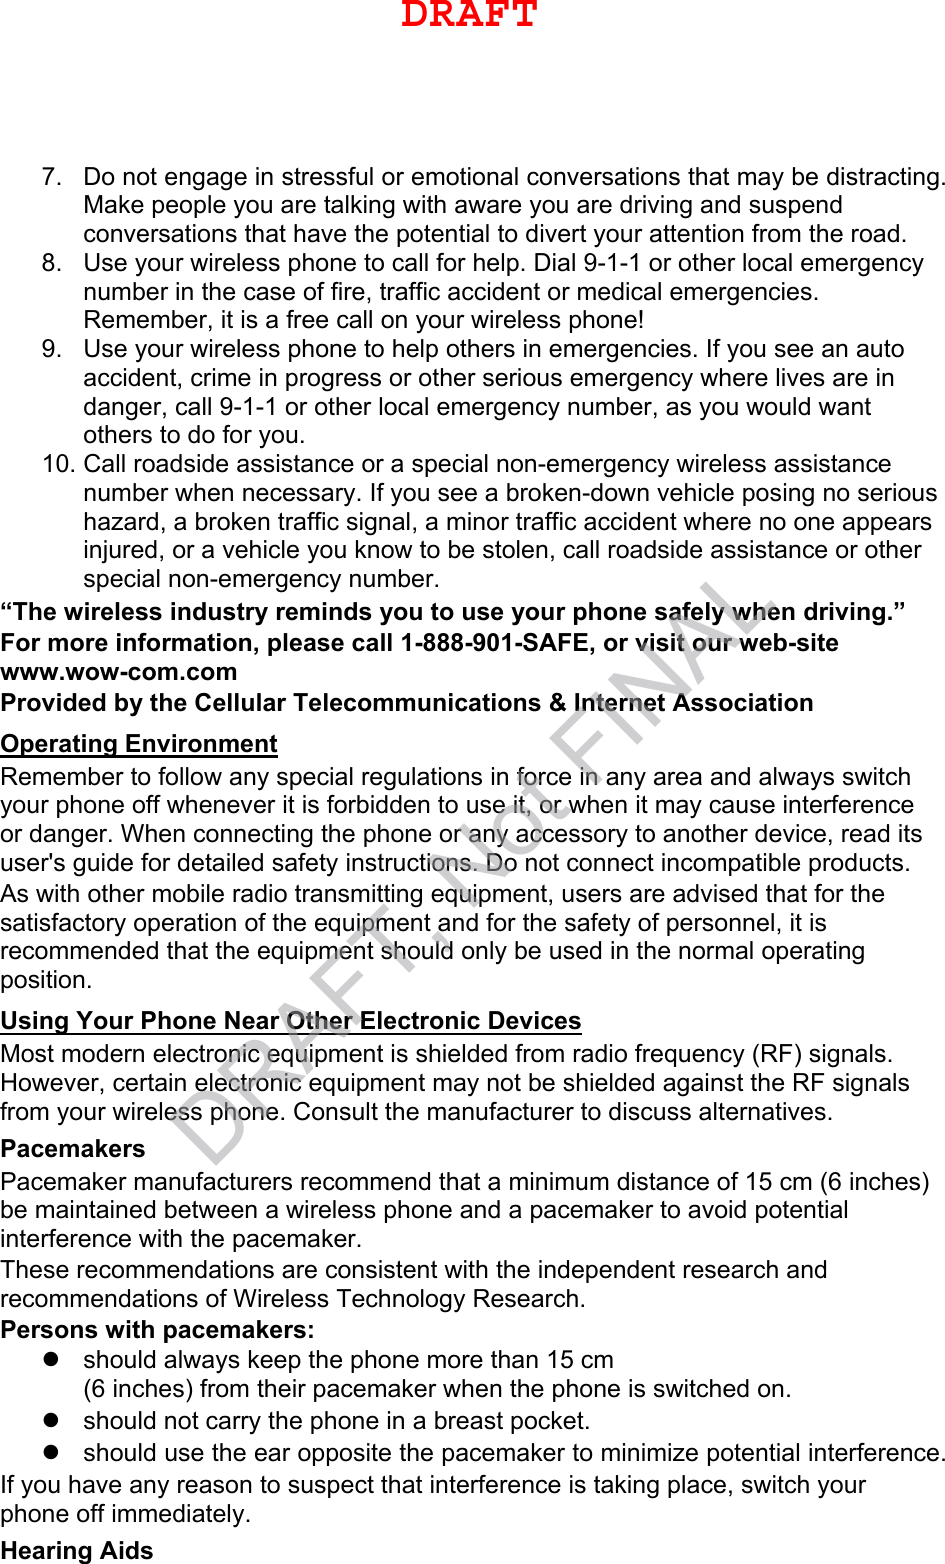 7. Do not engage in stressful or emotional conversations that may be distracting.Make people you are talking with aware you are driving and suspendconversations that have the potential to divert your attention from the road.8. Use your wireless phone to call for help. Dial 9-1-1 or other local emergencynumber in the case of fire, traffic accident or medical emergencies.Remember, it is a free call on your wireless phone!9. Use your wireless phone to help others in emergencies. If you see an autoaccident, crime in progress or other serious emergency where lives are indanger, call 9-1-1 or other local emergency number, as you would wantothers to do for you.10. Call roadside assistance or a special non-emergency wireless assistancenumber when necessary. If you see a broken-down vehicle posing no serioushazard, a broken traffic signal, a minor traffic accident where no one appearsinjured, or a vehicle you know to be stolen, call roadside assistance or otherspecial non-emergency number.“The wireless industry reminds you to use your phone safely when driving.” For more information, please call 1-888-901-SAFE, or visit our web-site www.wow-com.com Provided by the Cellular Telecommunications &amp; Internet Association Operating Environment Remember to follow any special regulations in force in any area and always switch your phone off whenever it is forbidden to use it, or when it may cause interference or danger. When connecting the phone or any accessory to another device, read its user&apos;s guide for detailed safety instructions. Do not connect incompatible products. As with other mobile radio transmitting equipment, users are advised that for the satisfactory operation of the equipment and for the safety of personnel, it is recommended that the equipment should only be used in the normal operating position. Using Your Phone Near Other Electronic Devices Most modern electronic equipment is shielded from radio frequency (RF) signals. However, certain electronic equipment may not be shielded against the RF signals from your wireless phone. Consult the manufacturer to discuss alternatives. Pacemakers Pacemaker manufacturers recommend that a minimum distance of 15 cm (6 inches) be maintained between a wireless phone and a pacemaker to avoid potential interference with the pacemaker. These recommendations are consistent with the independent research and recommendations of Wireless Technology Research. Persons with pacemakers: should always keep the phone more than 15 cm(6 inches) from their pacemaker when the phone is switched on.should not carry the phone in a breast pocket.should use the ear opposite the pacemaker to minimize potential interference.If you have any reason to suspect that interference is taking place, switch your phone off immediately. Hearing Aids DRAFTDRAFT, Not FINAL